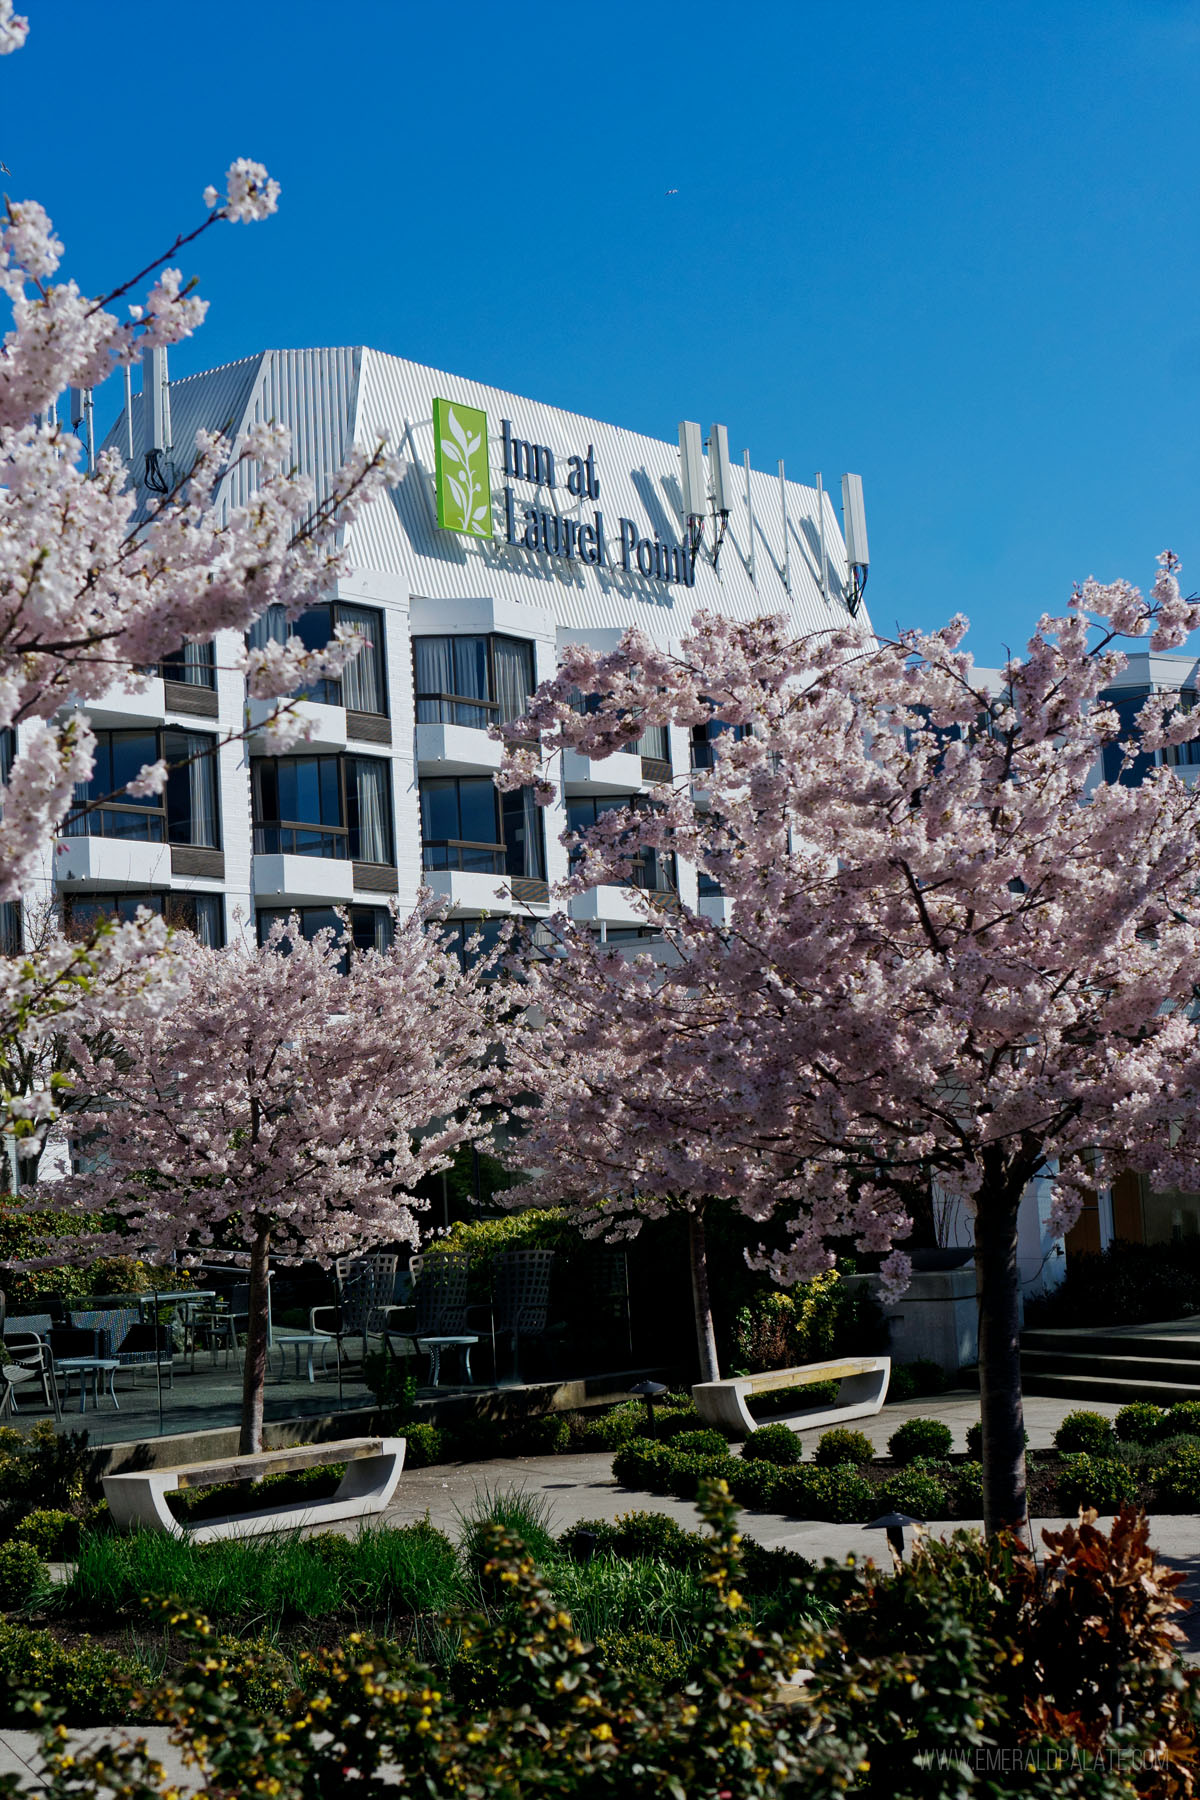 Exterior of the Inn at Laurel Point Hotel in spring with cherry blossoms in bloom